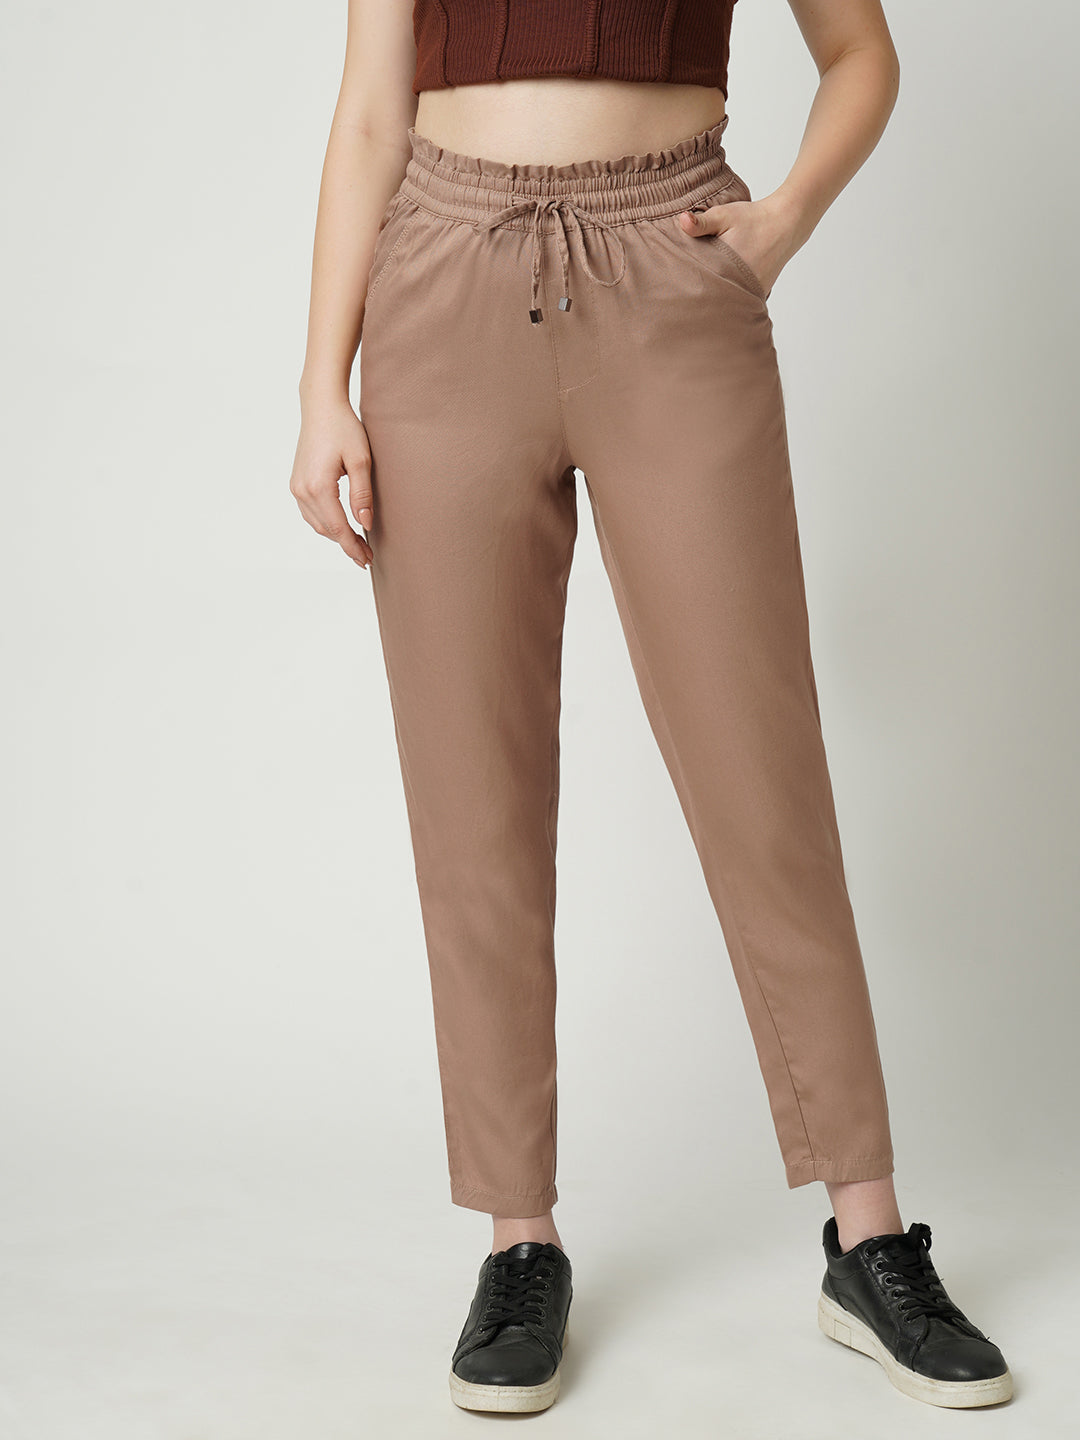 Checked Paper Bag Trousers –